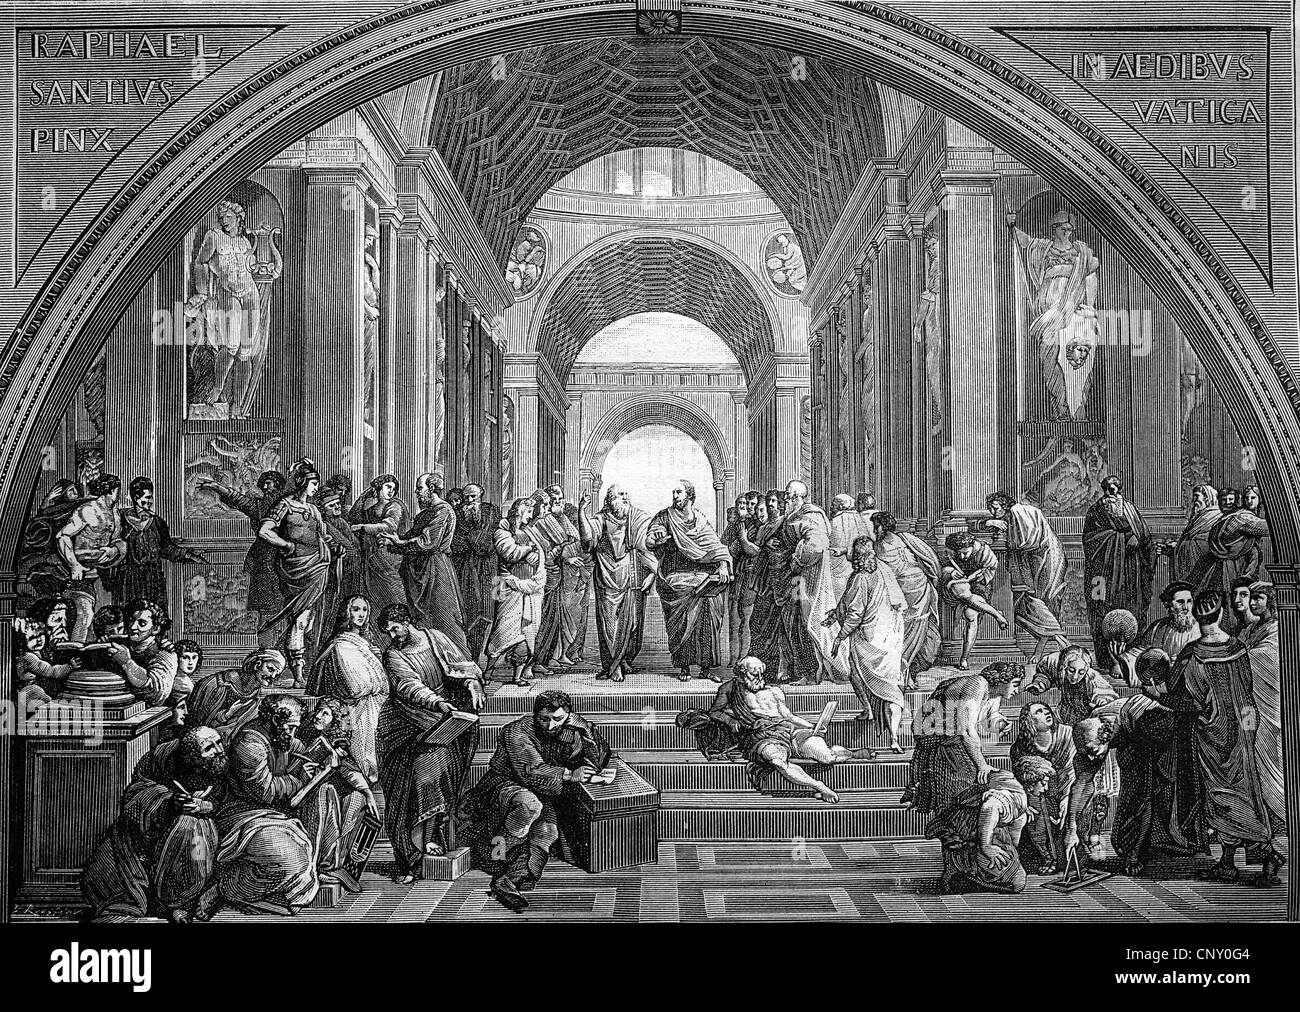 The School of Athens, 1510, engraving after a painting by Raphael, historical woodcut, circa 1888 Stock Photo